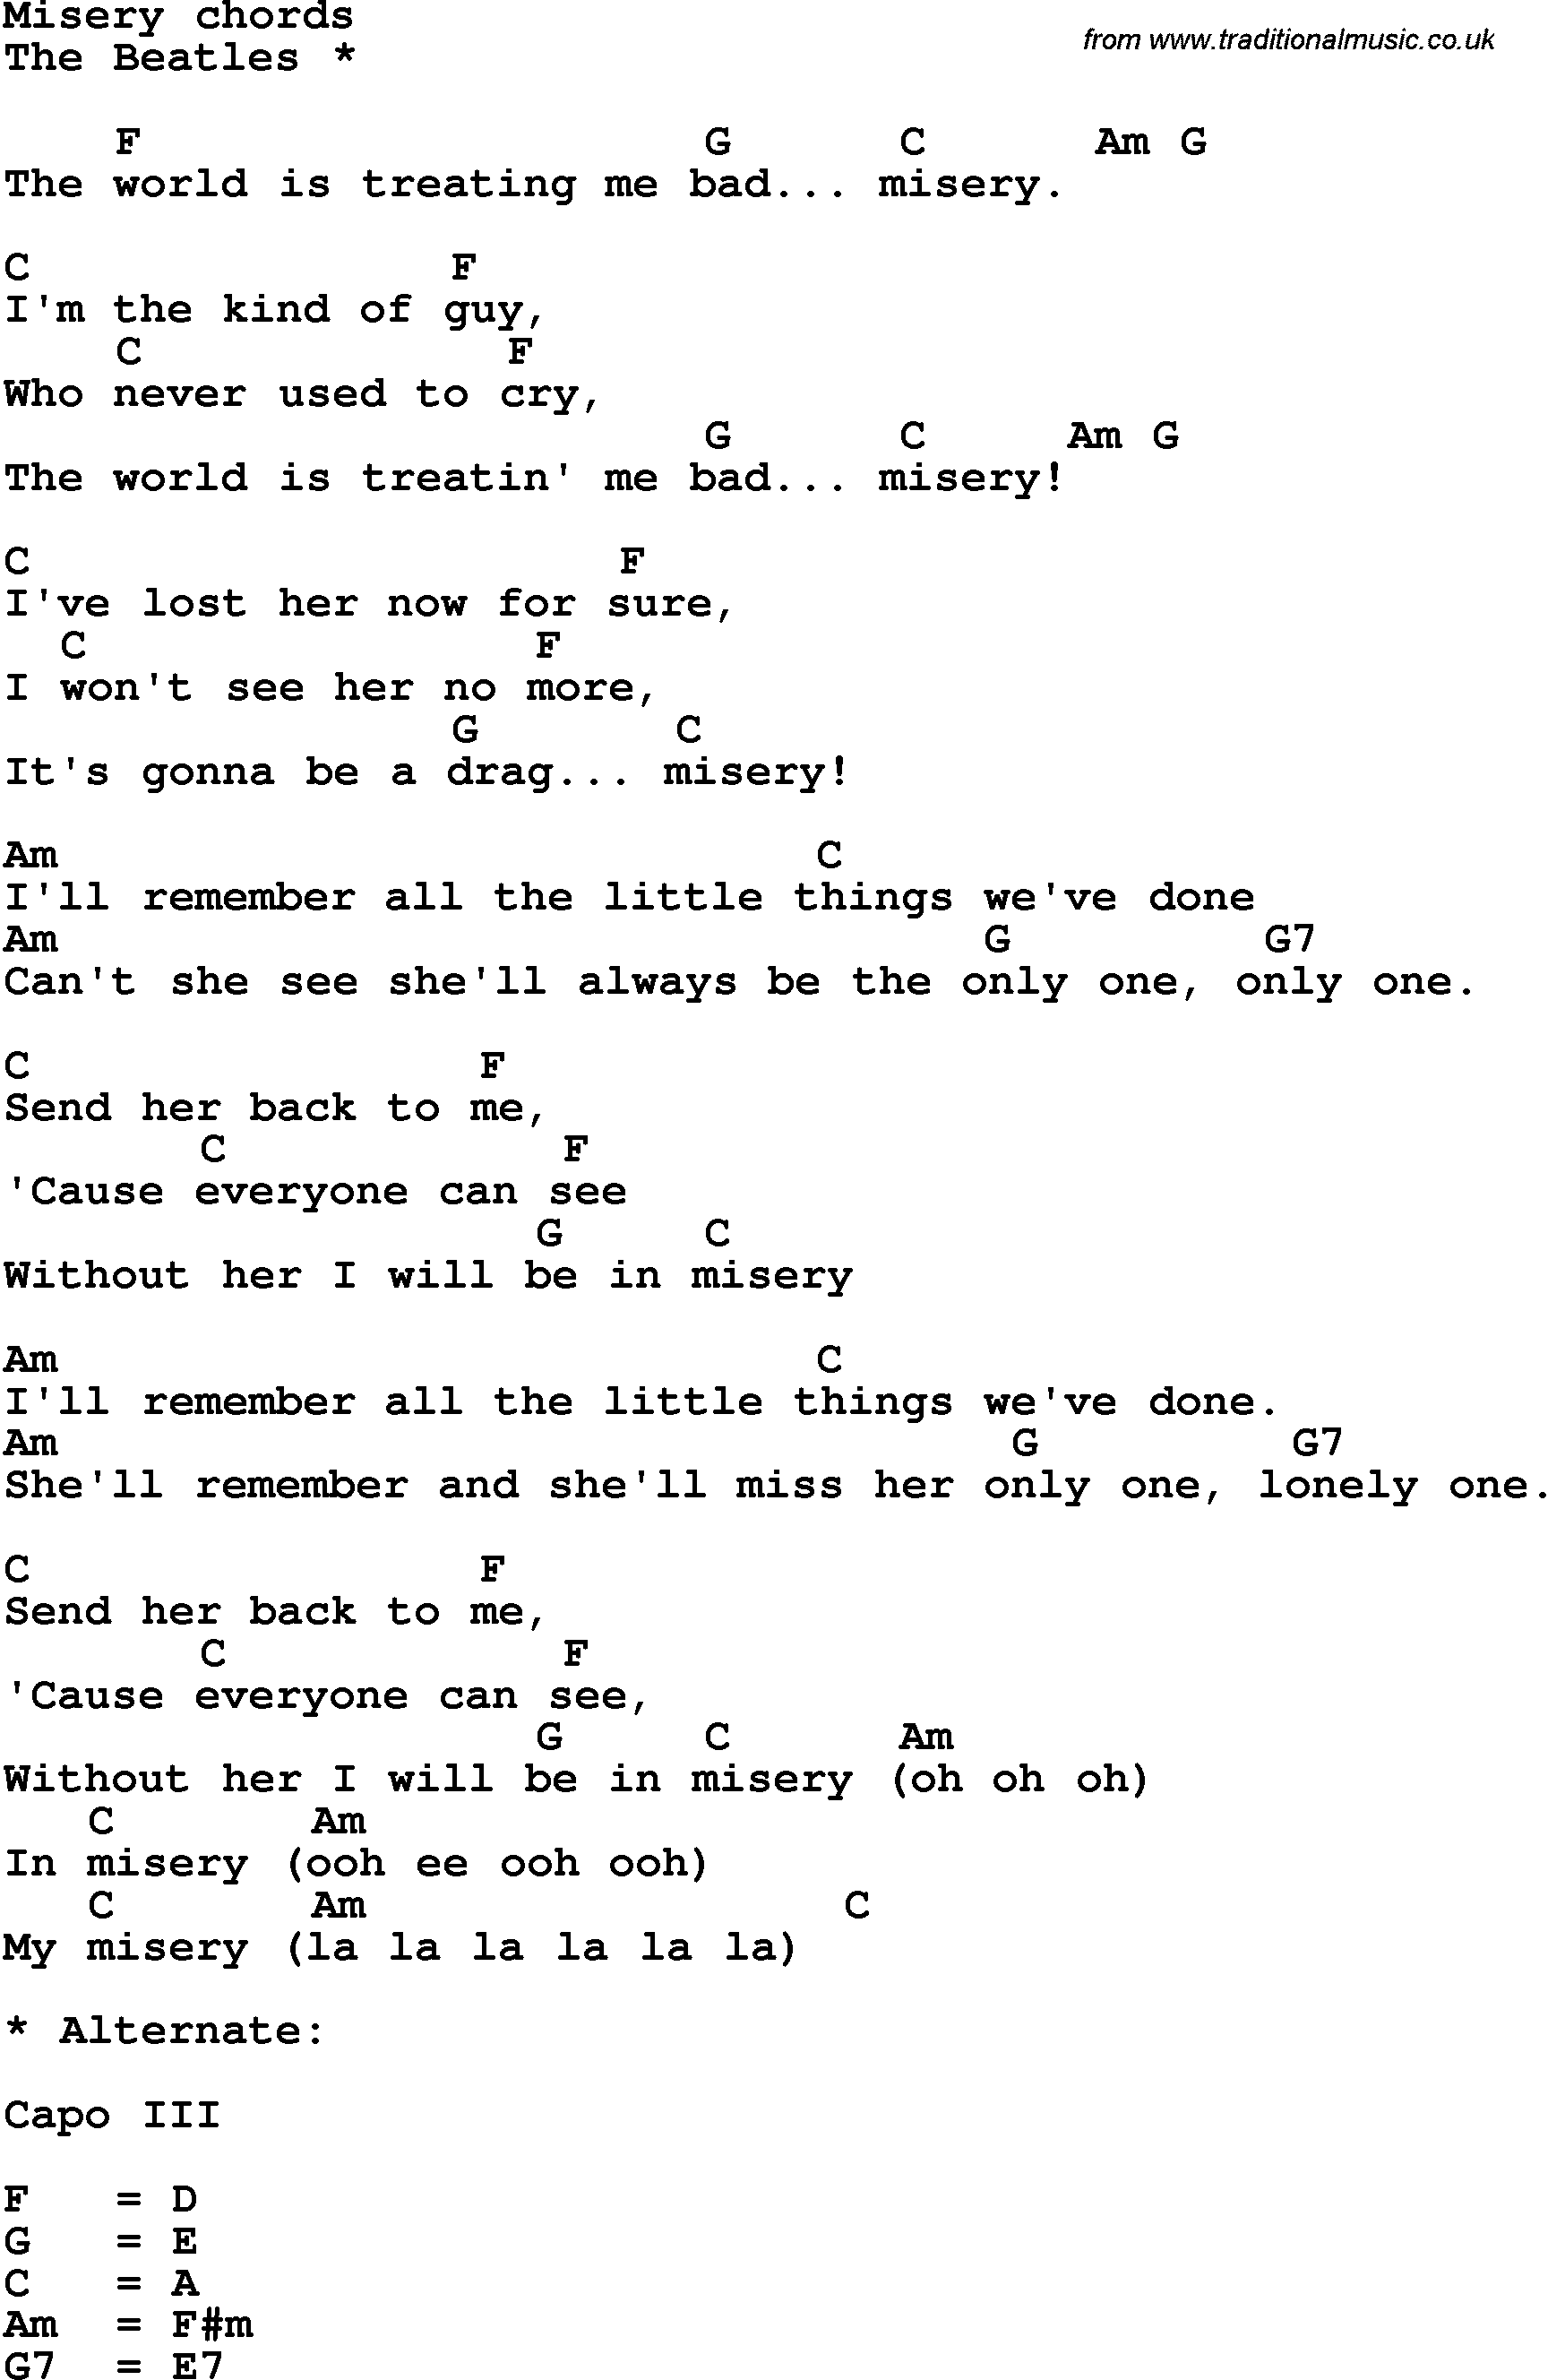 Song Lyrics with guitar chords for Misery - The Beatles